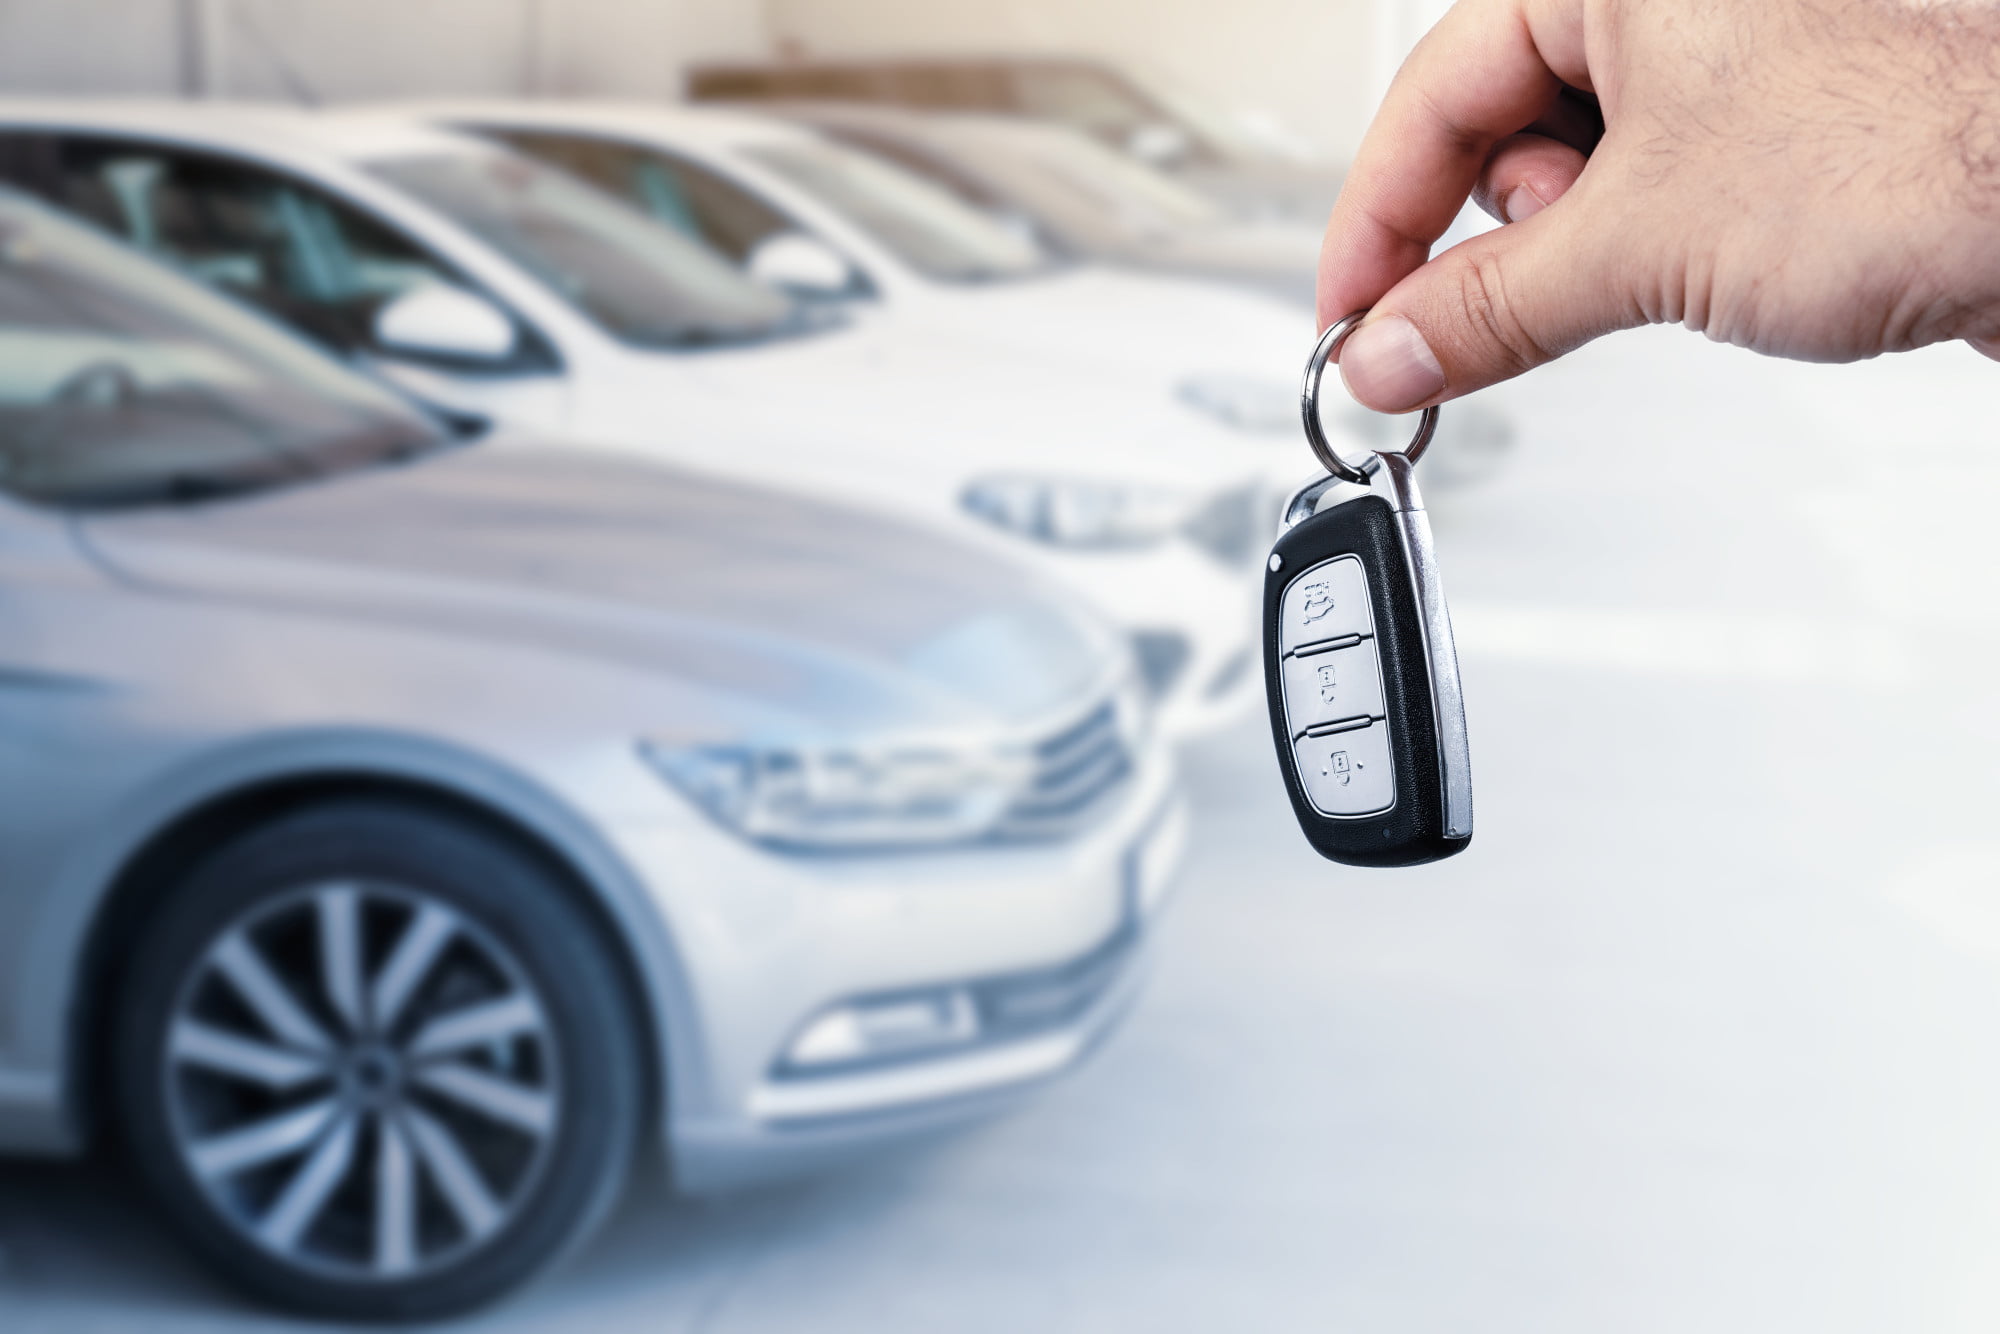 Are you looking to buy or lease a car for business? Learn more about what you need to know between buying or leasing a car and the advantages for your business.